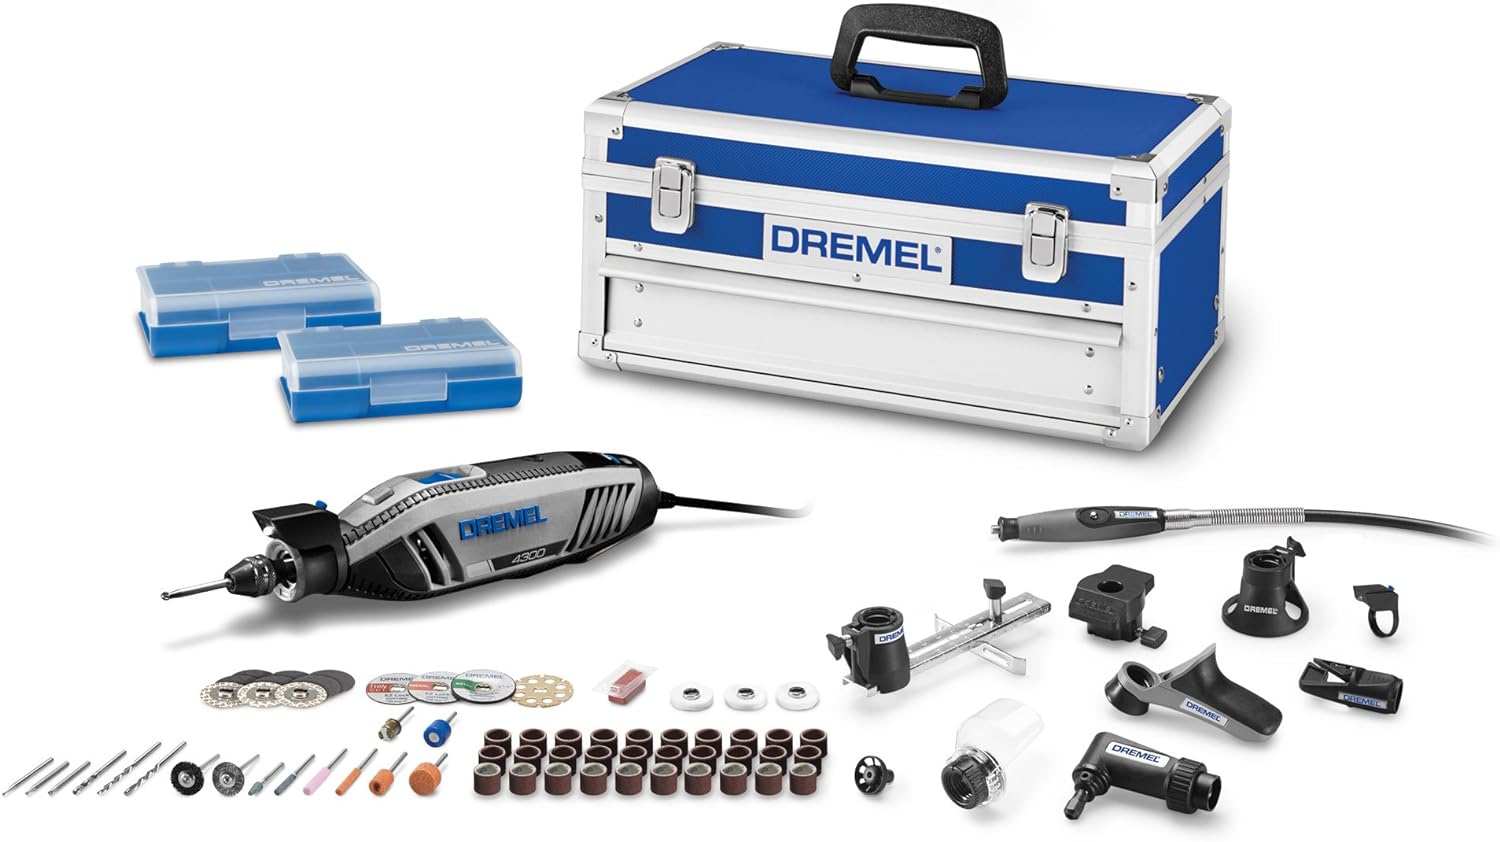 Dremel 4300-9/64 Versatile Corded Rotary Tool Kit with Flex Shaft and Hard Storage Case, High Power  Performance, Variable Speed- Engraver, Etcher, Sander, and Polisher, Ultimate Gift for the DIYER